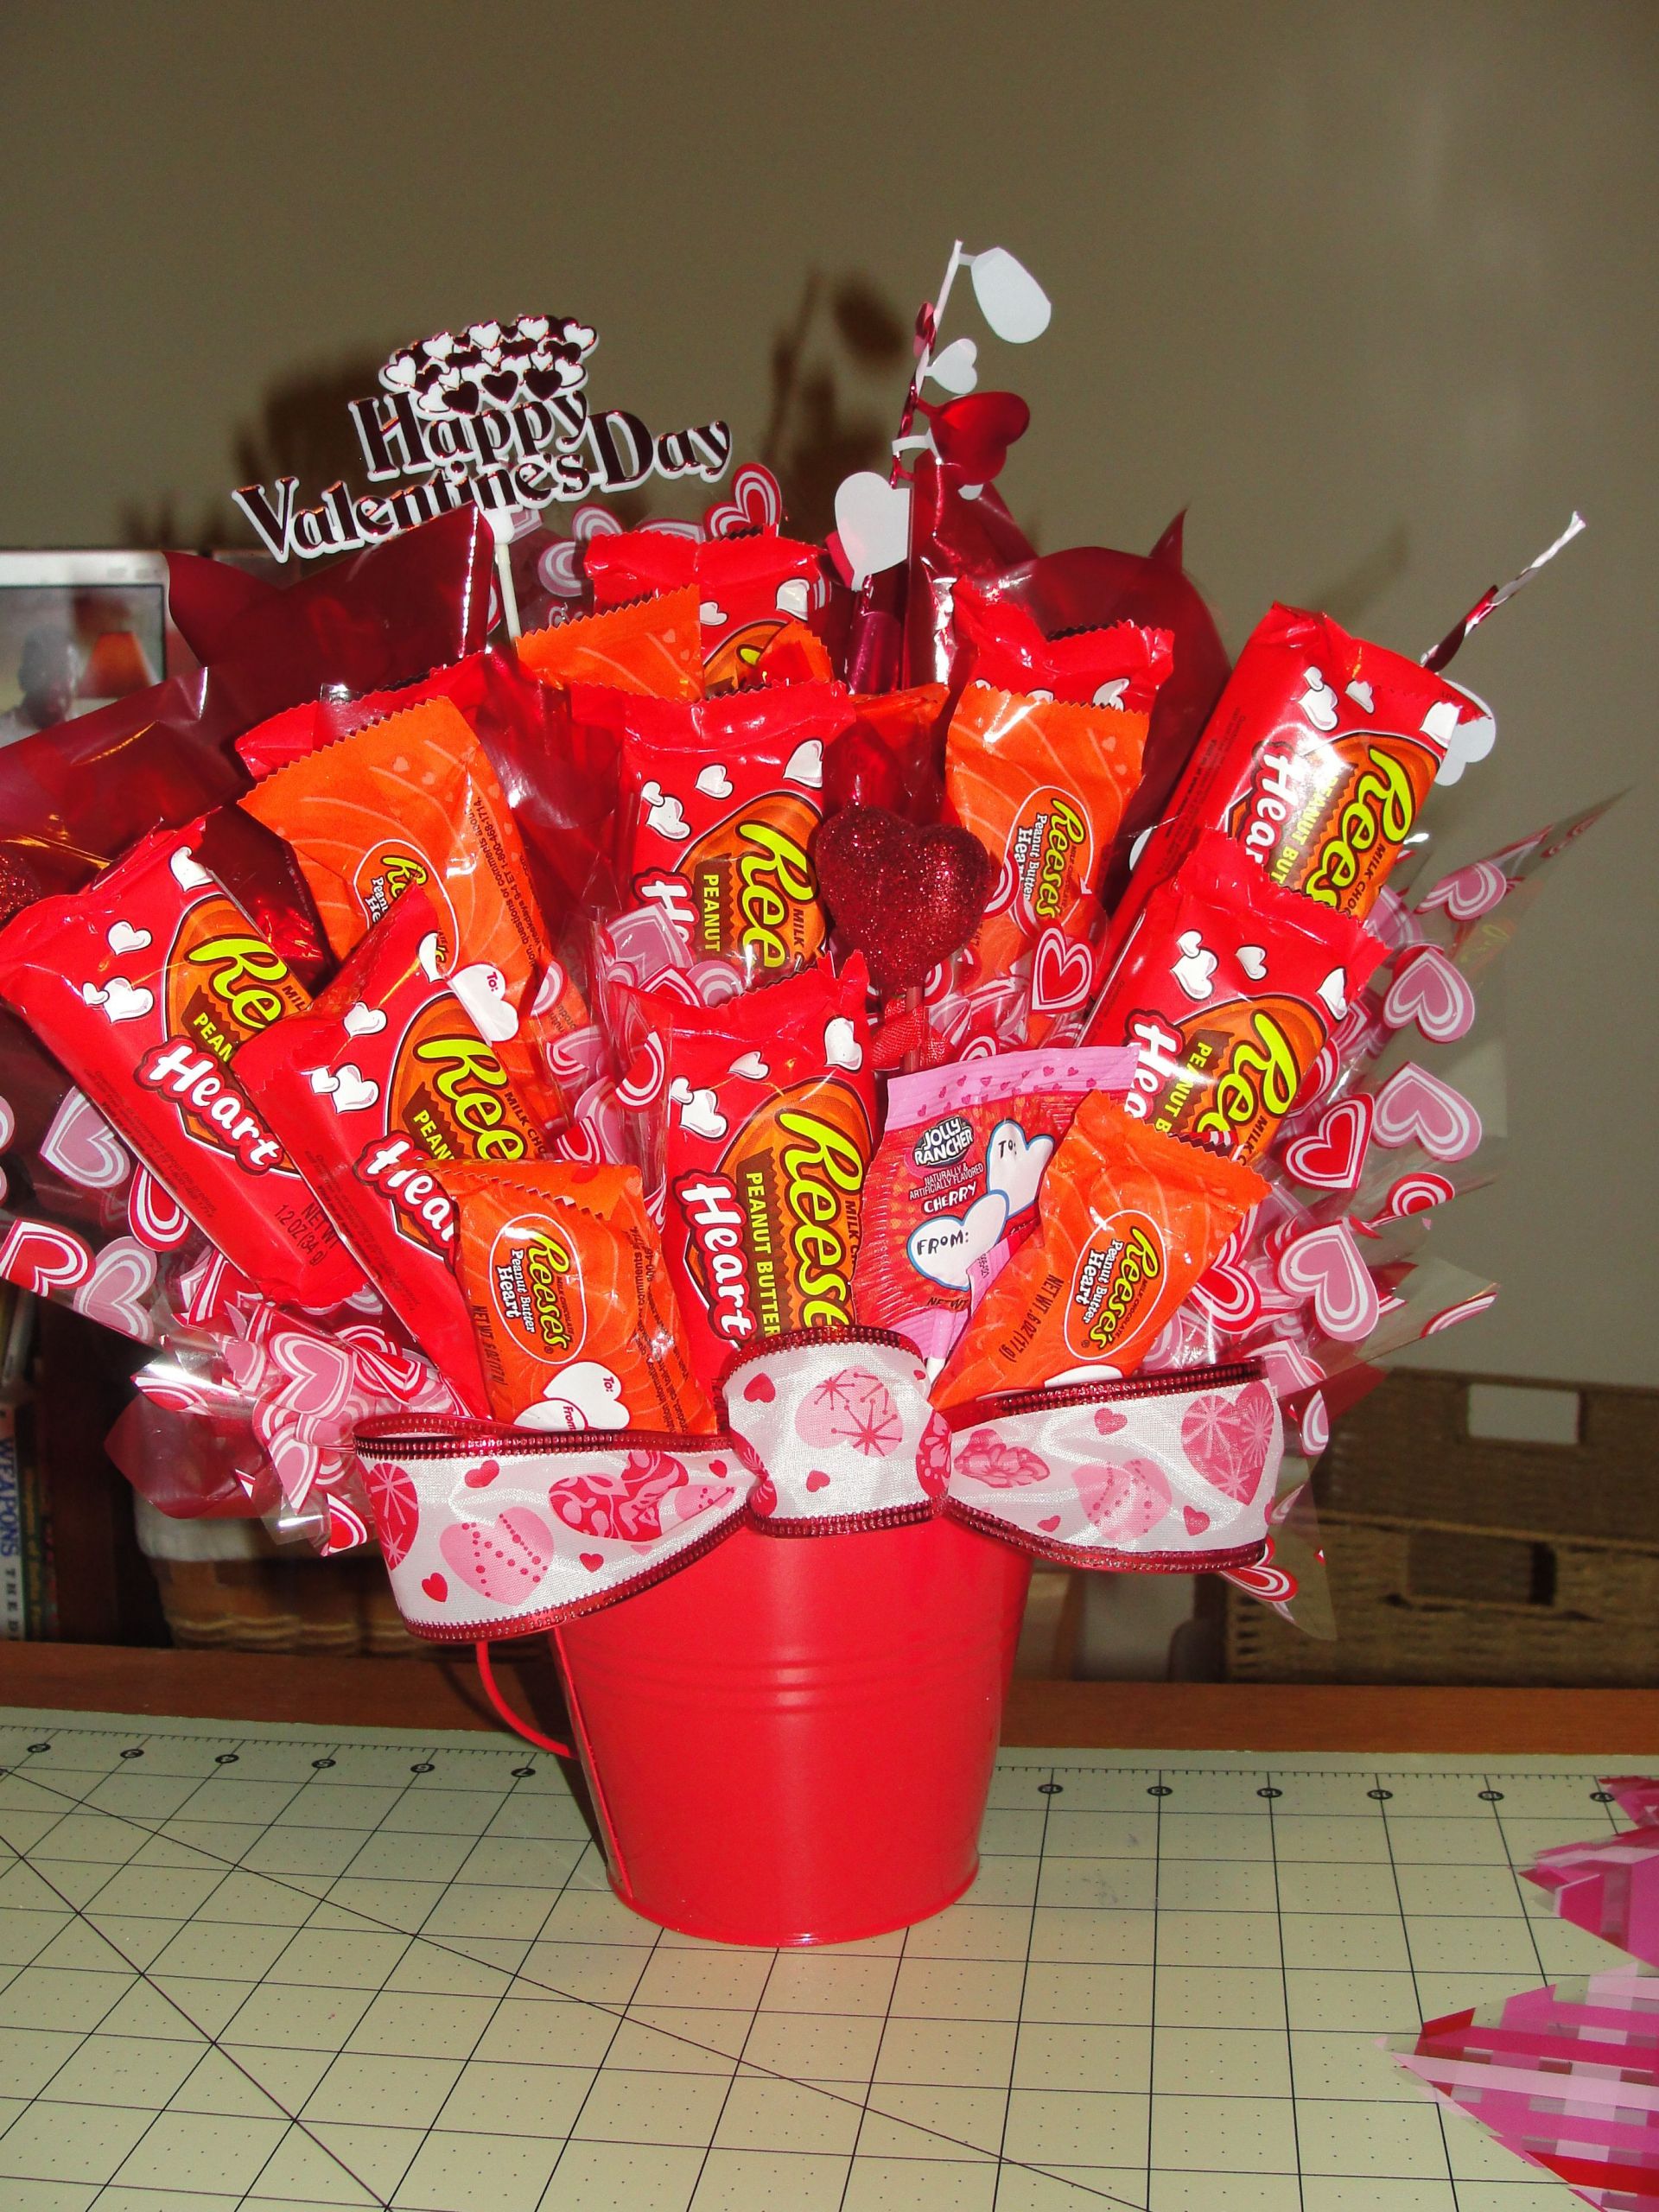 Valentines Candy Gift Ideas
 Reece s Valentines Day Bouquet